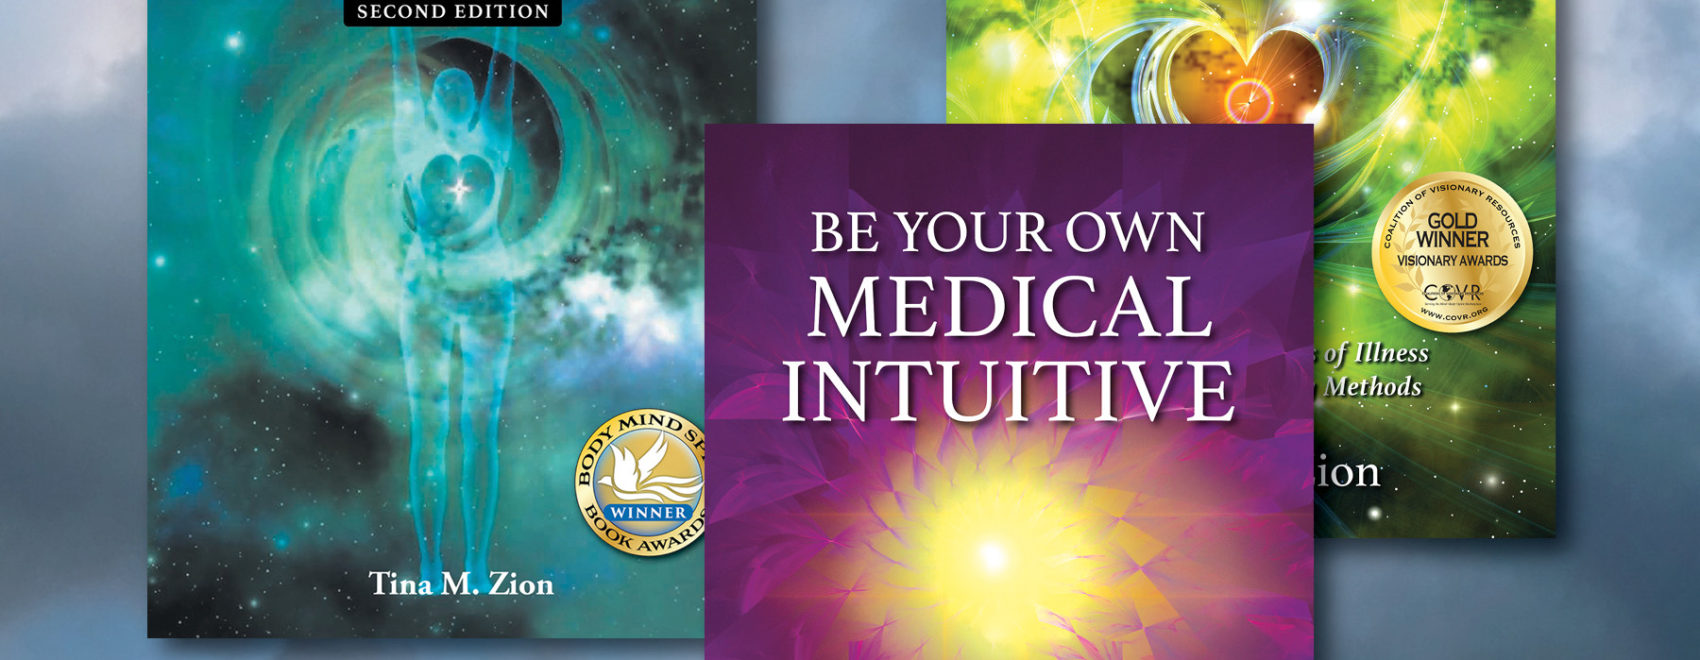 The Medical Intuition Series three book covers books by Tina M. Zion